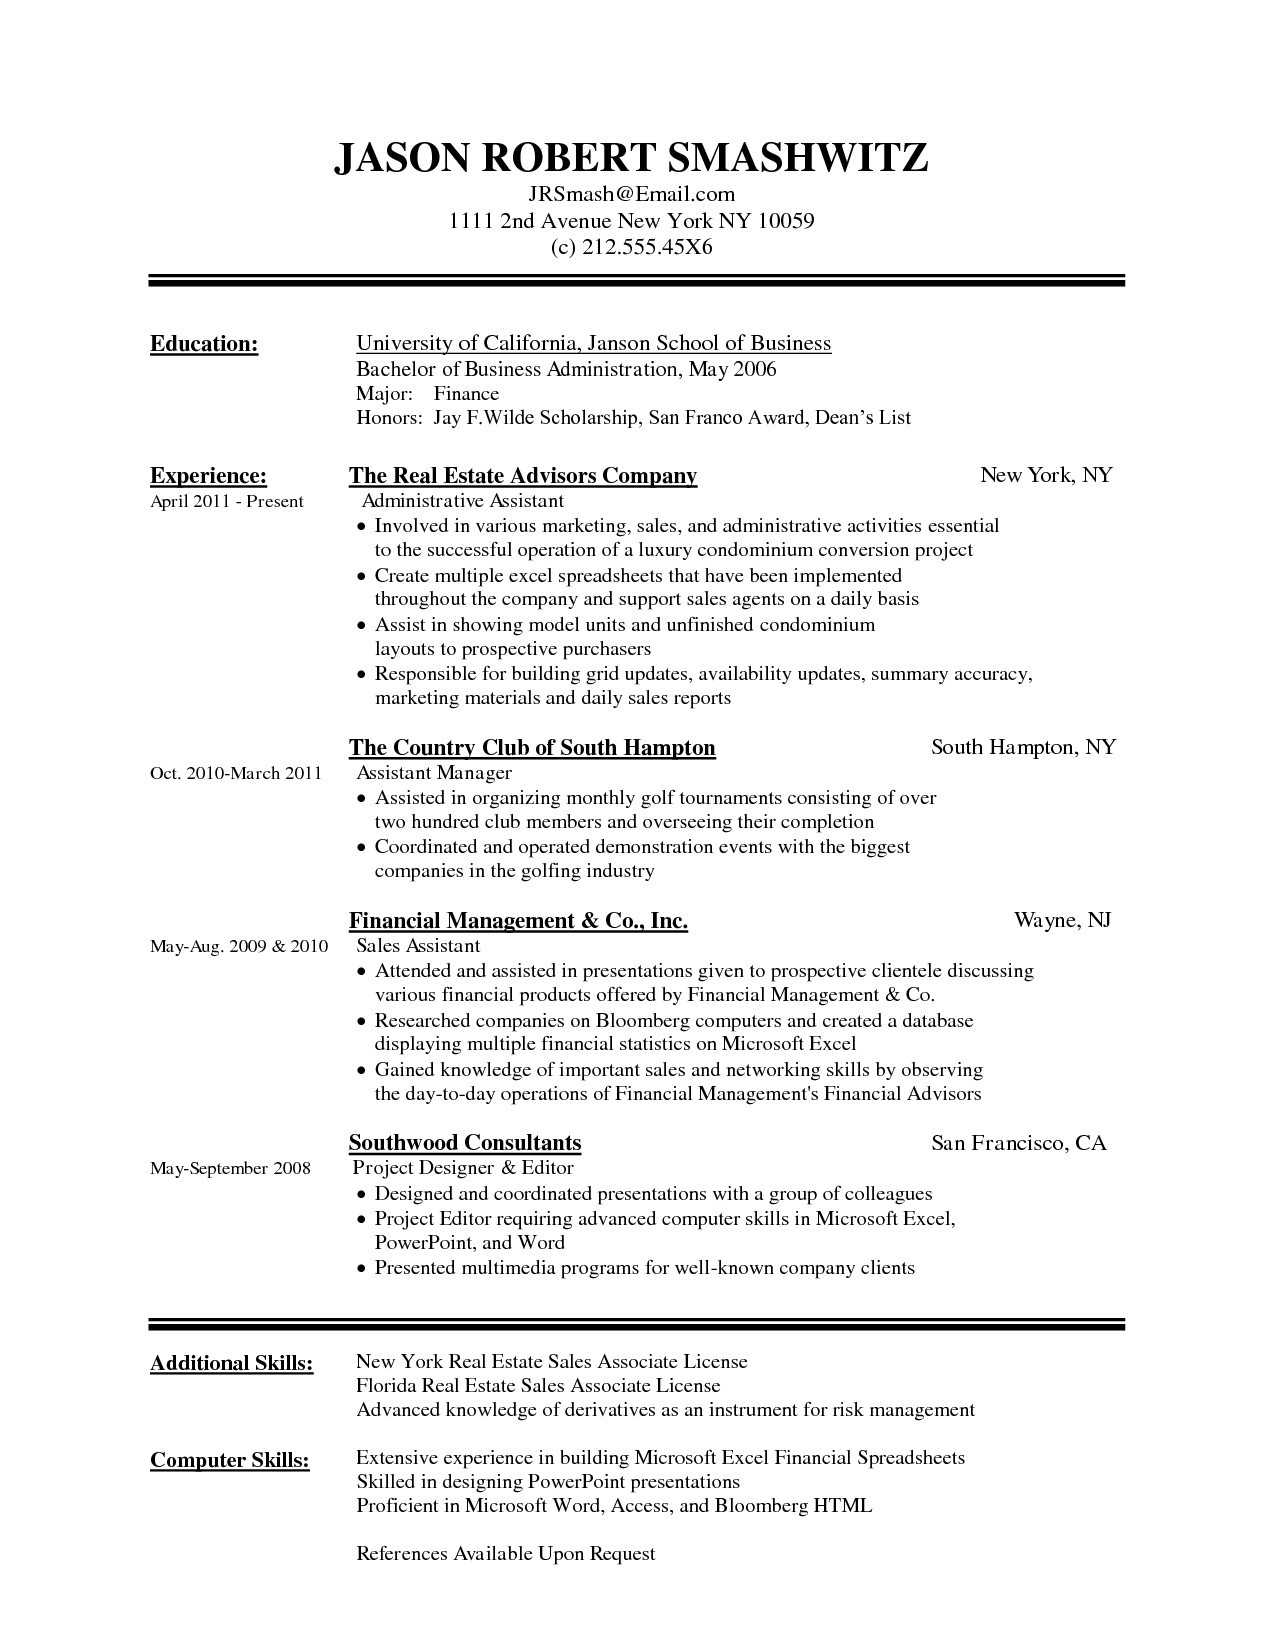 Awesome Resume Templates For Word 2010 - Superkepo Inside Resume Templates Word 2010